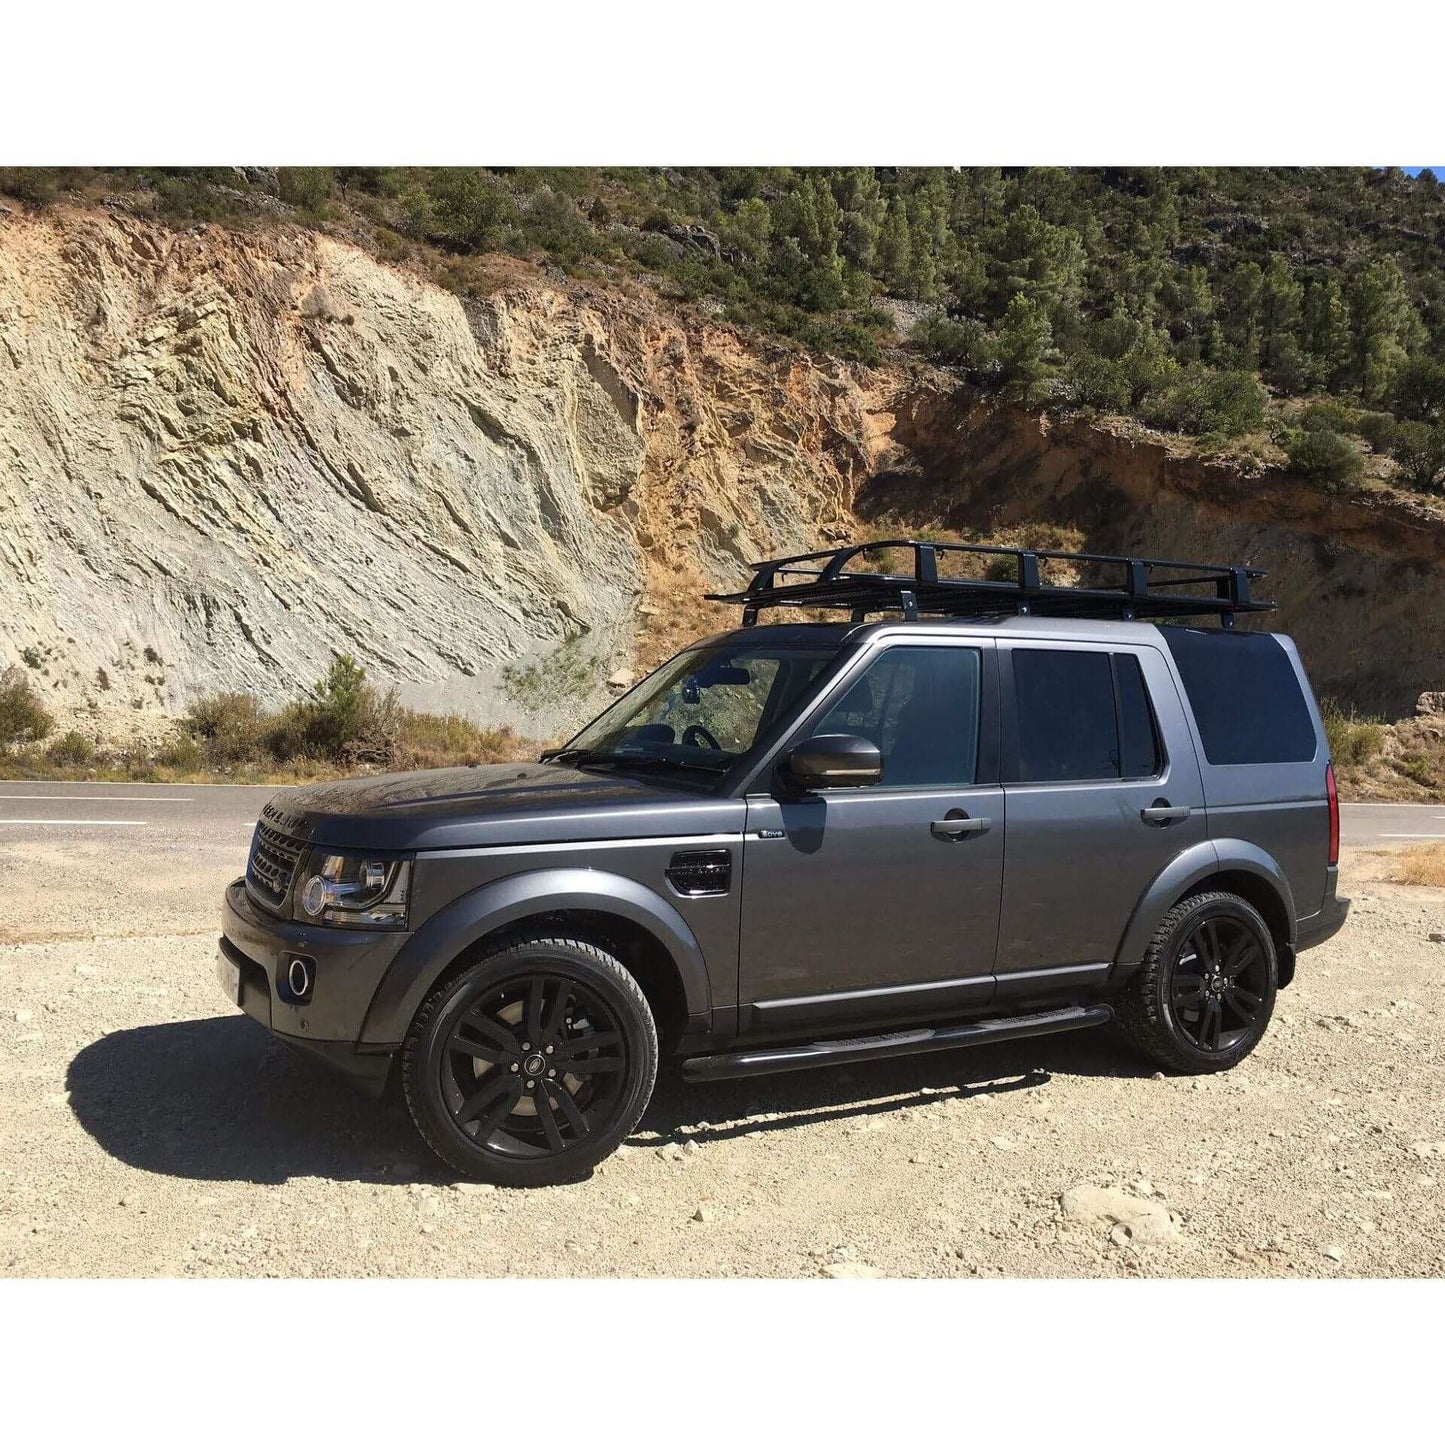 Expedition Aluminium Full Basket Roof Rack for Land Rover Discovery 3 and 4